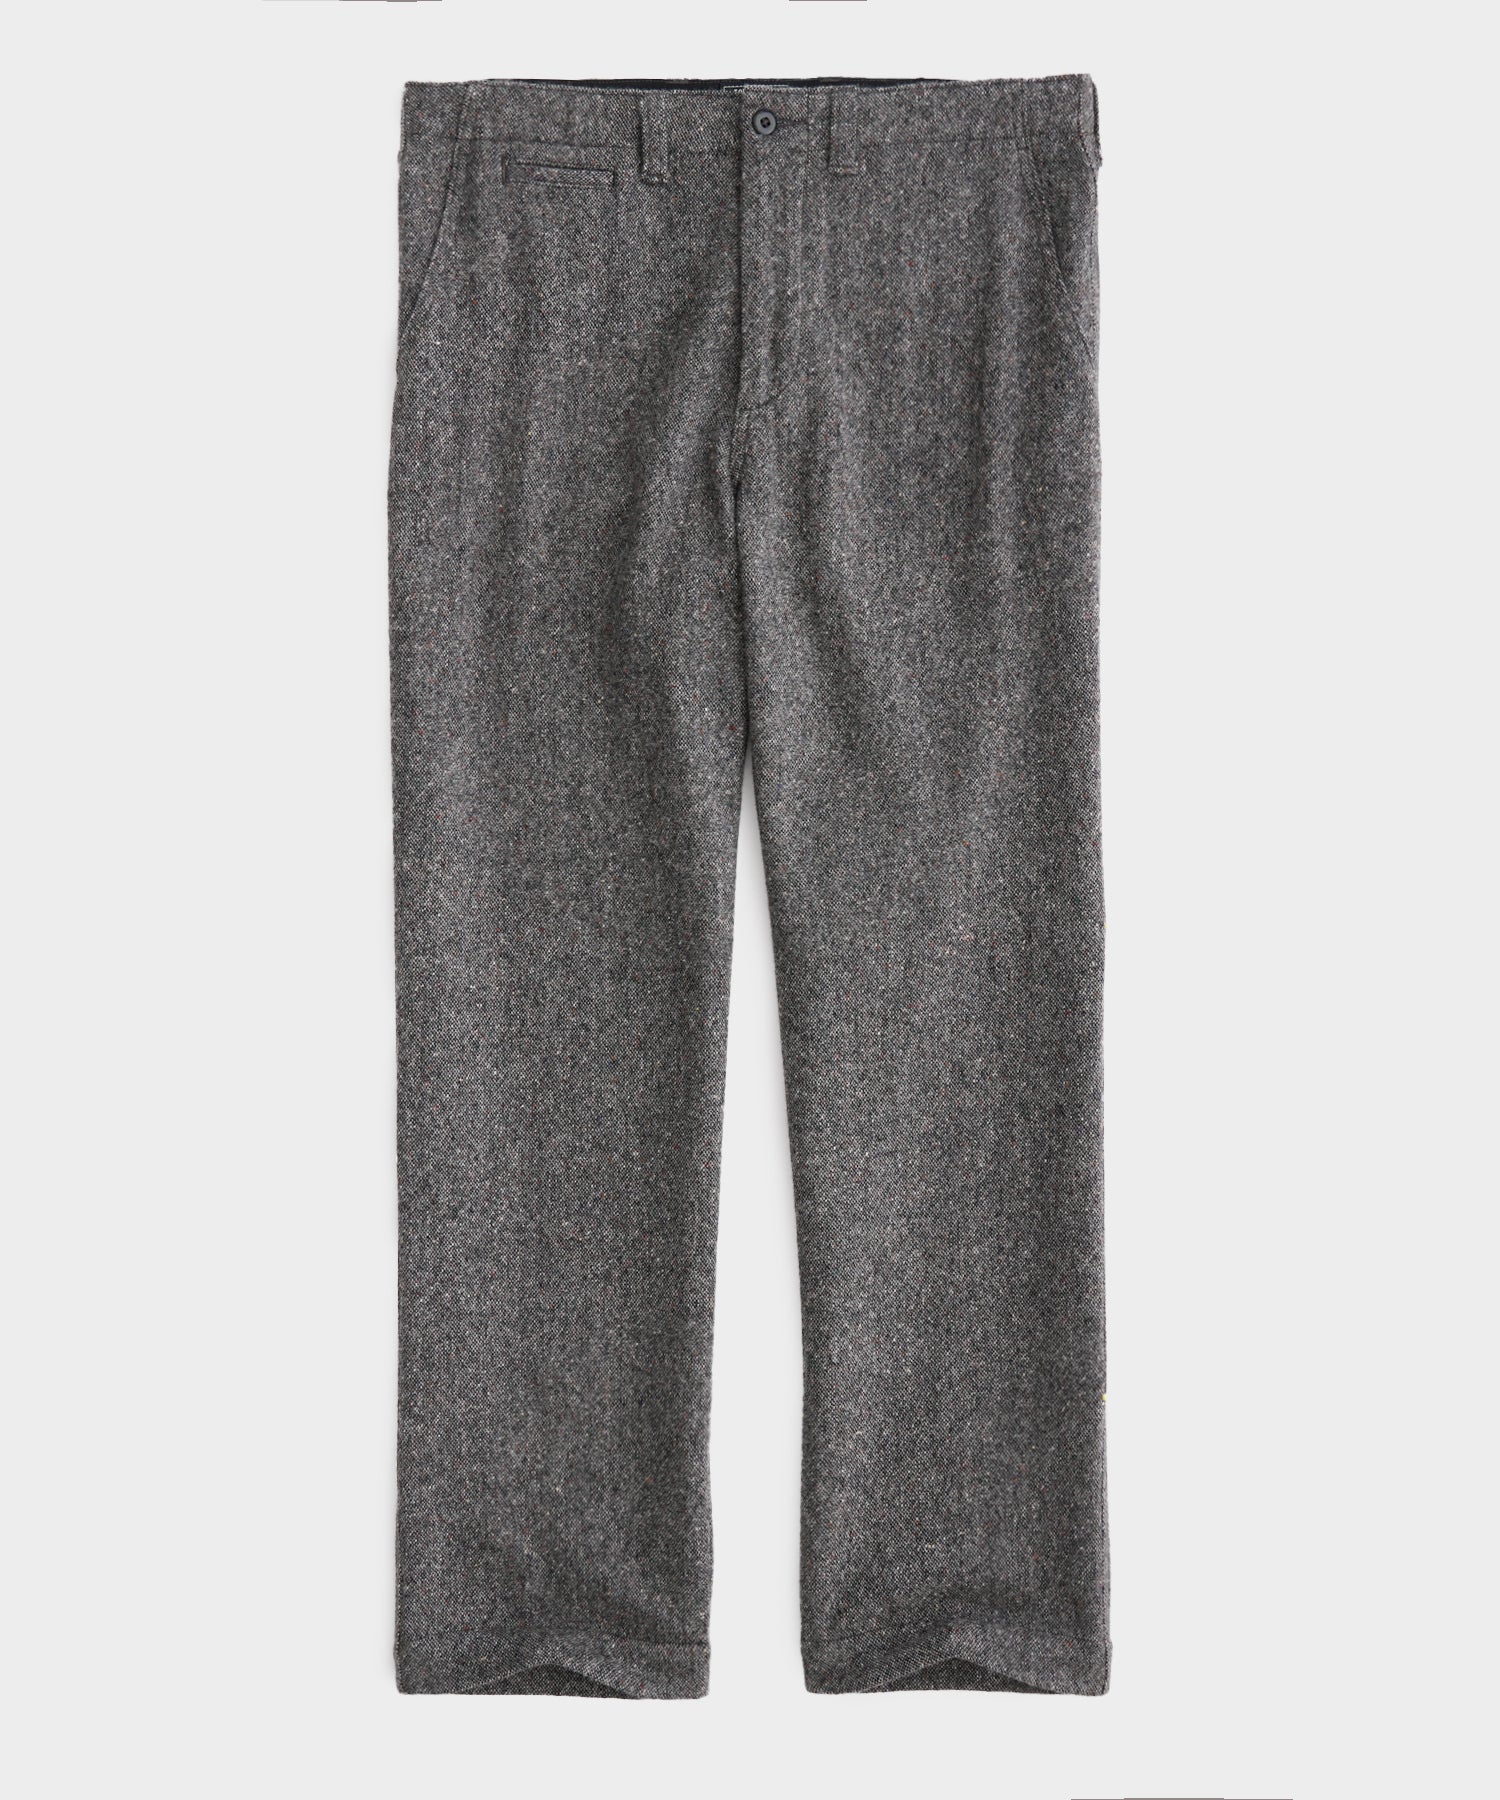 Relaxed Fit Chino Charcoal Donegal